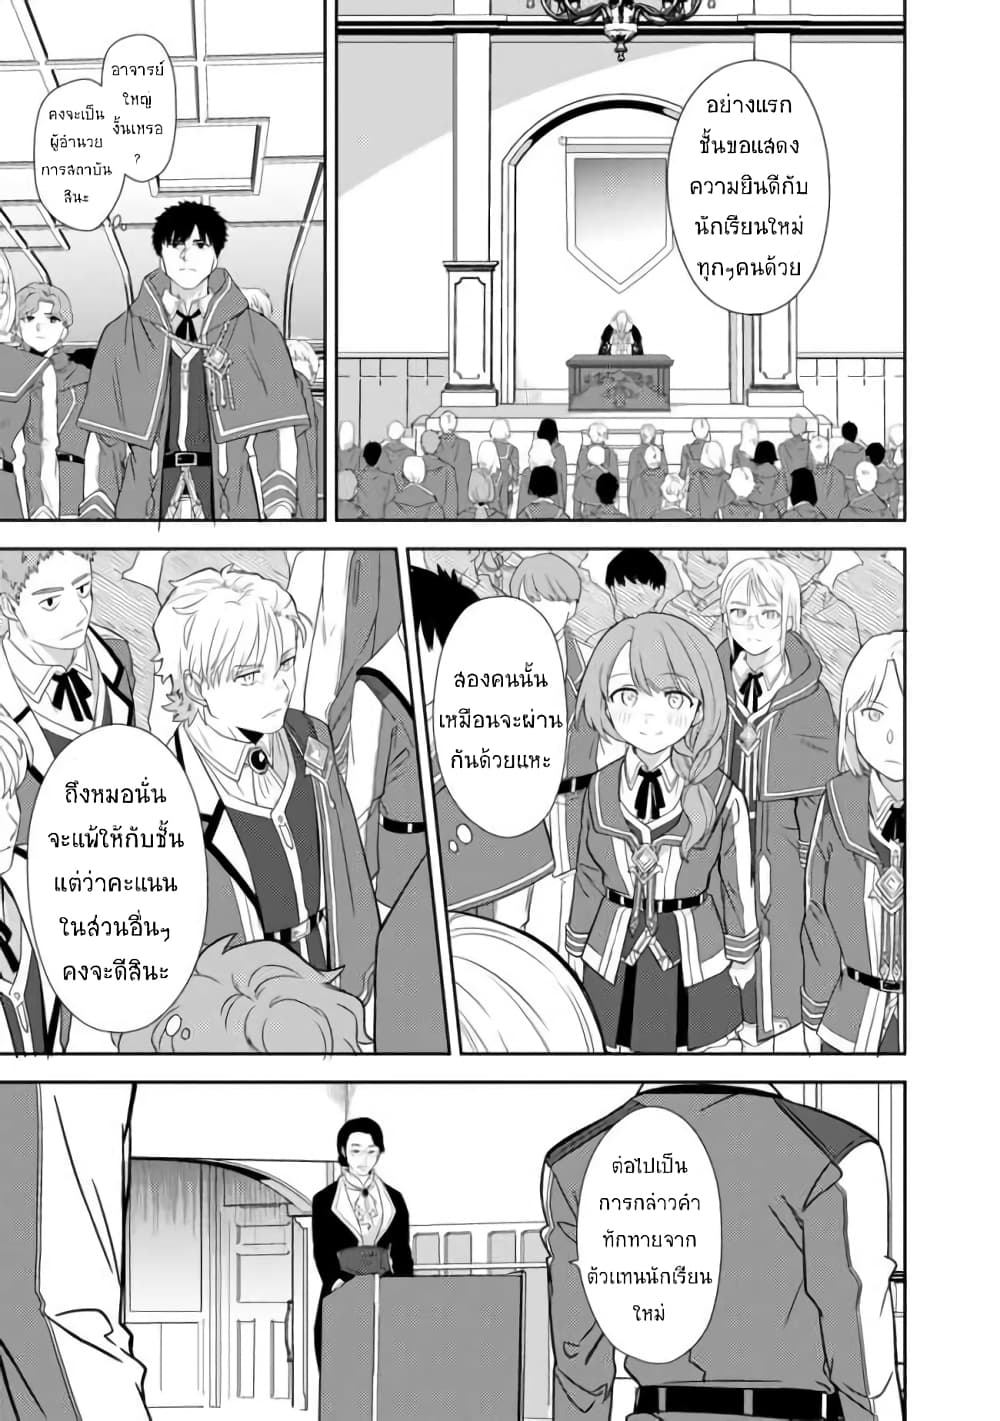 The Reincarnated Swordsman With 9999 Strength Wants to Become a Magician! ตอนที่ 1. 2 (27)